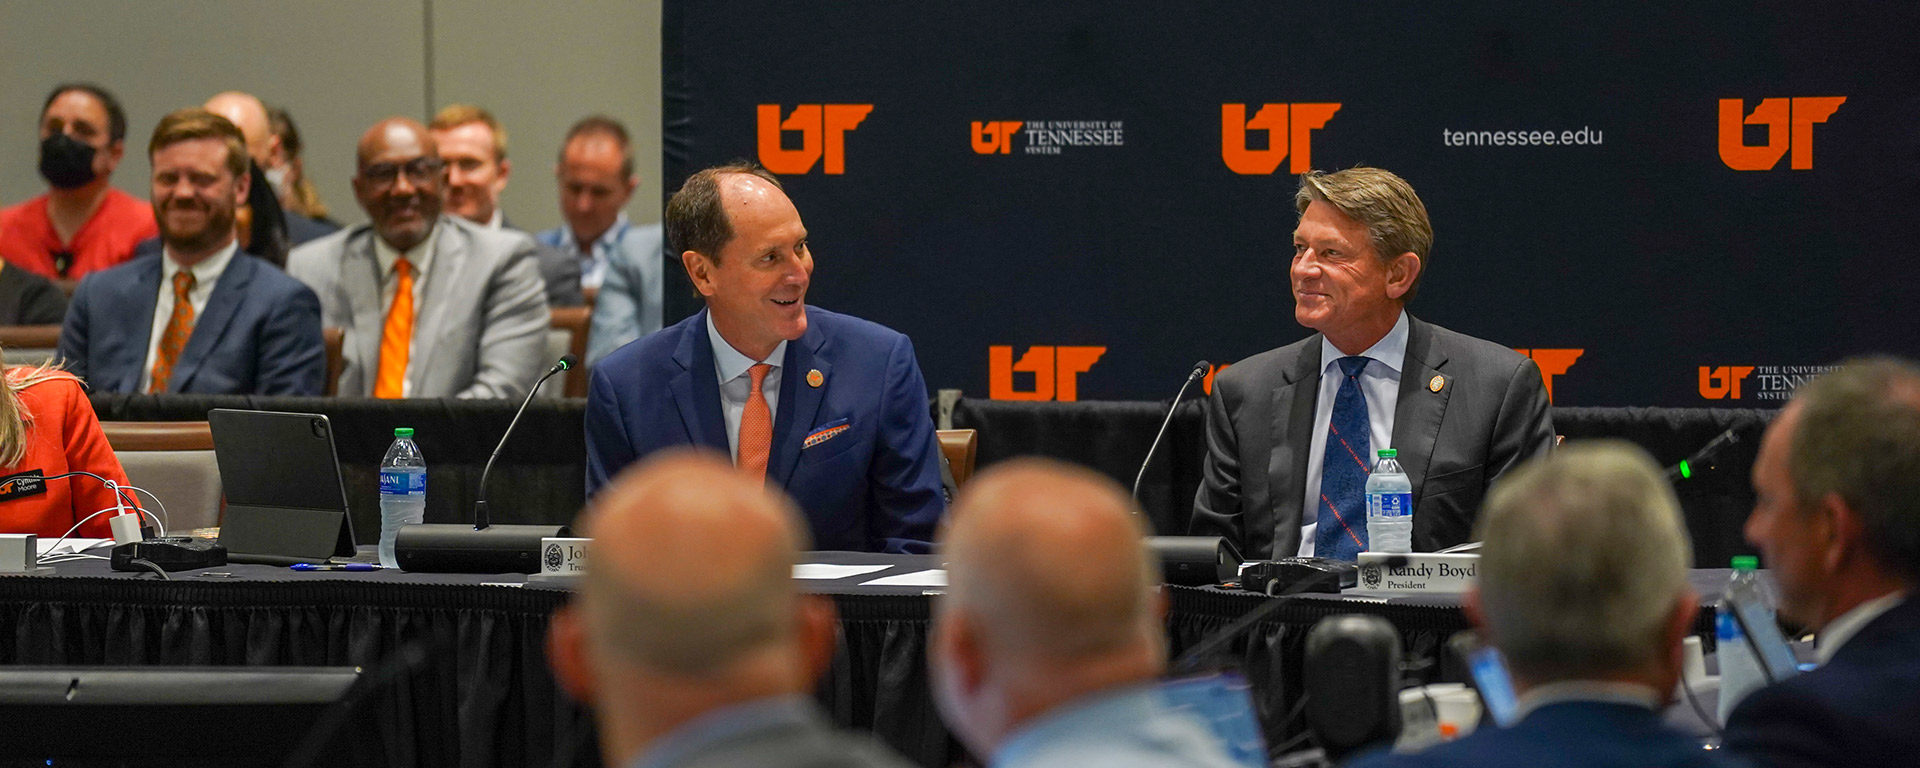 UT Board of Trustees Chairman John Compton and UT President Randy Boyd during the annual meeting. Photo By Sam Thomas